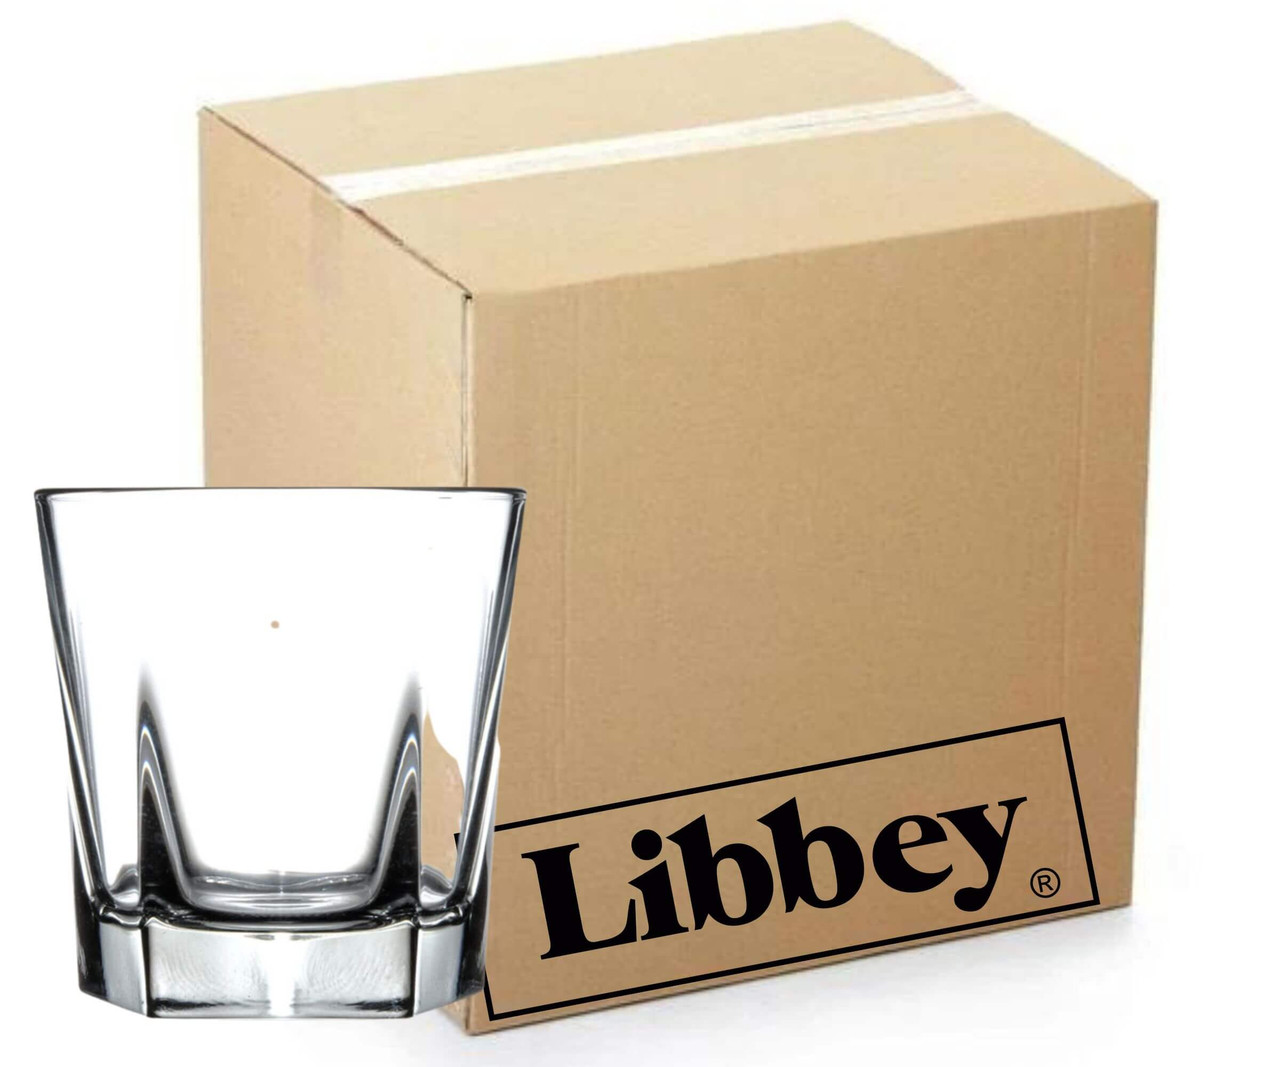 Libbey Inverness Duratuff 12.5 oz Double Old Fashioned Glass